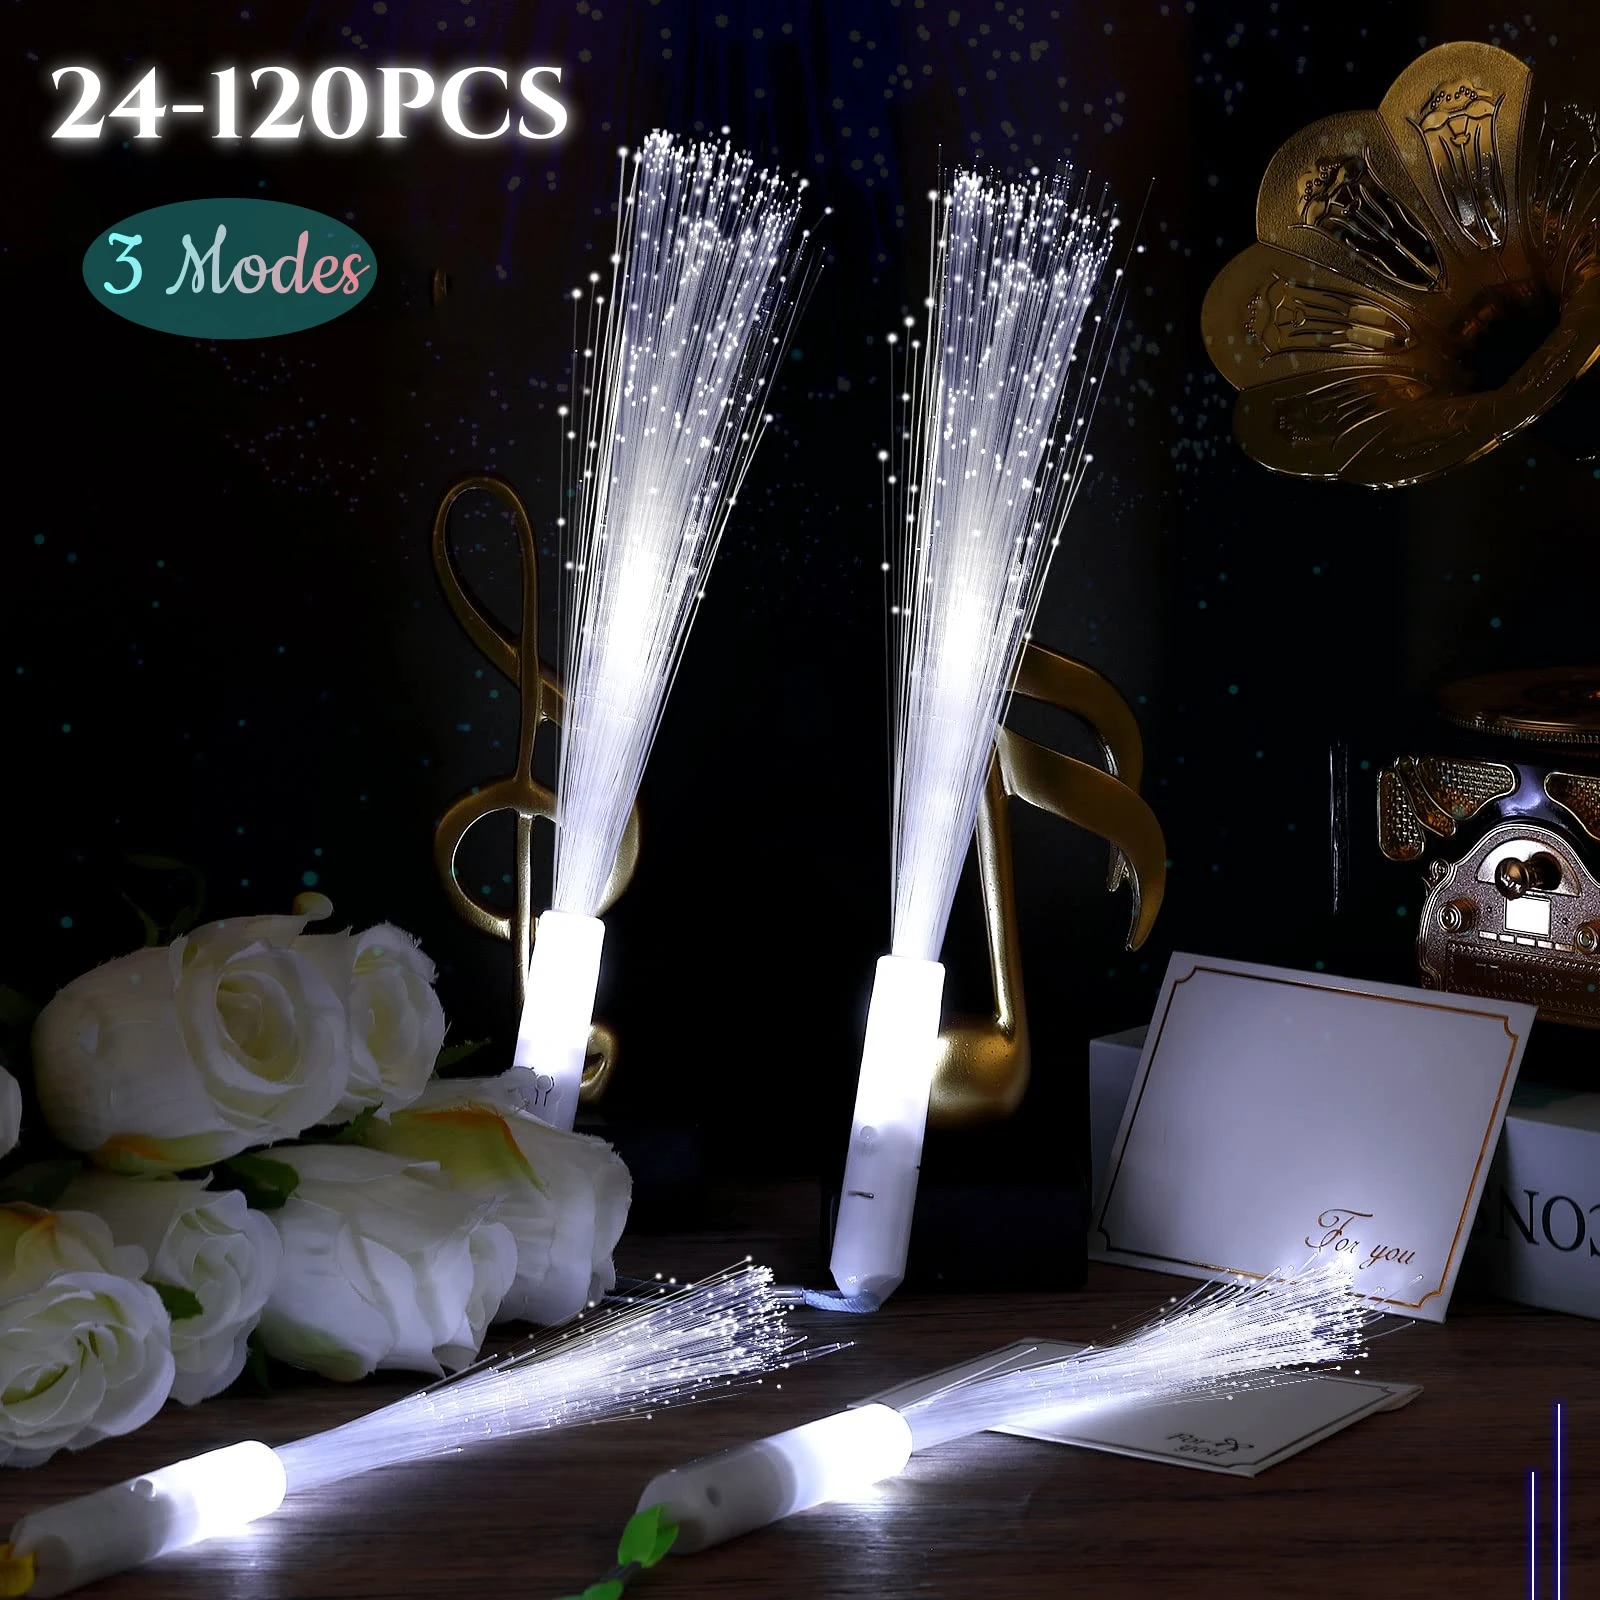 

24-120 Pieces White Fiber Optic Wands Glow Sticks LED Light up Wedding Wand with 3 Light Modes For Birthday Glow Party Supplies